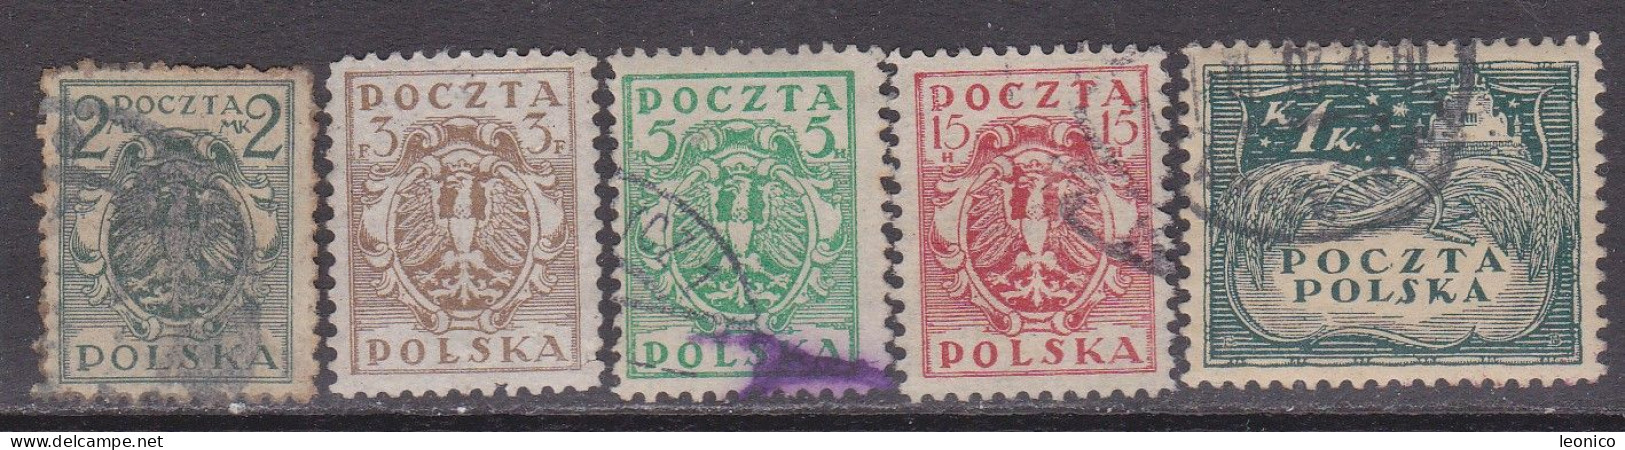 Polen1919 / Mich.Nr:78... / Yx686 - Used Stamps